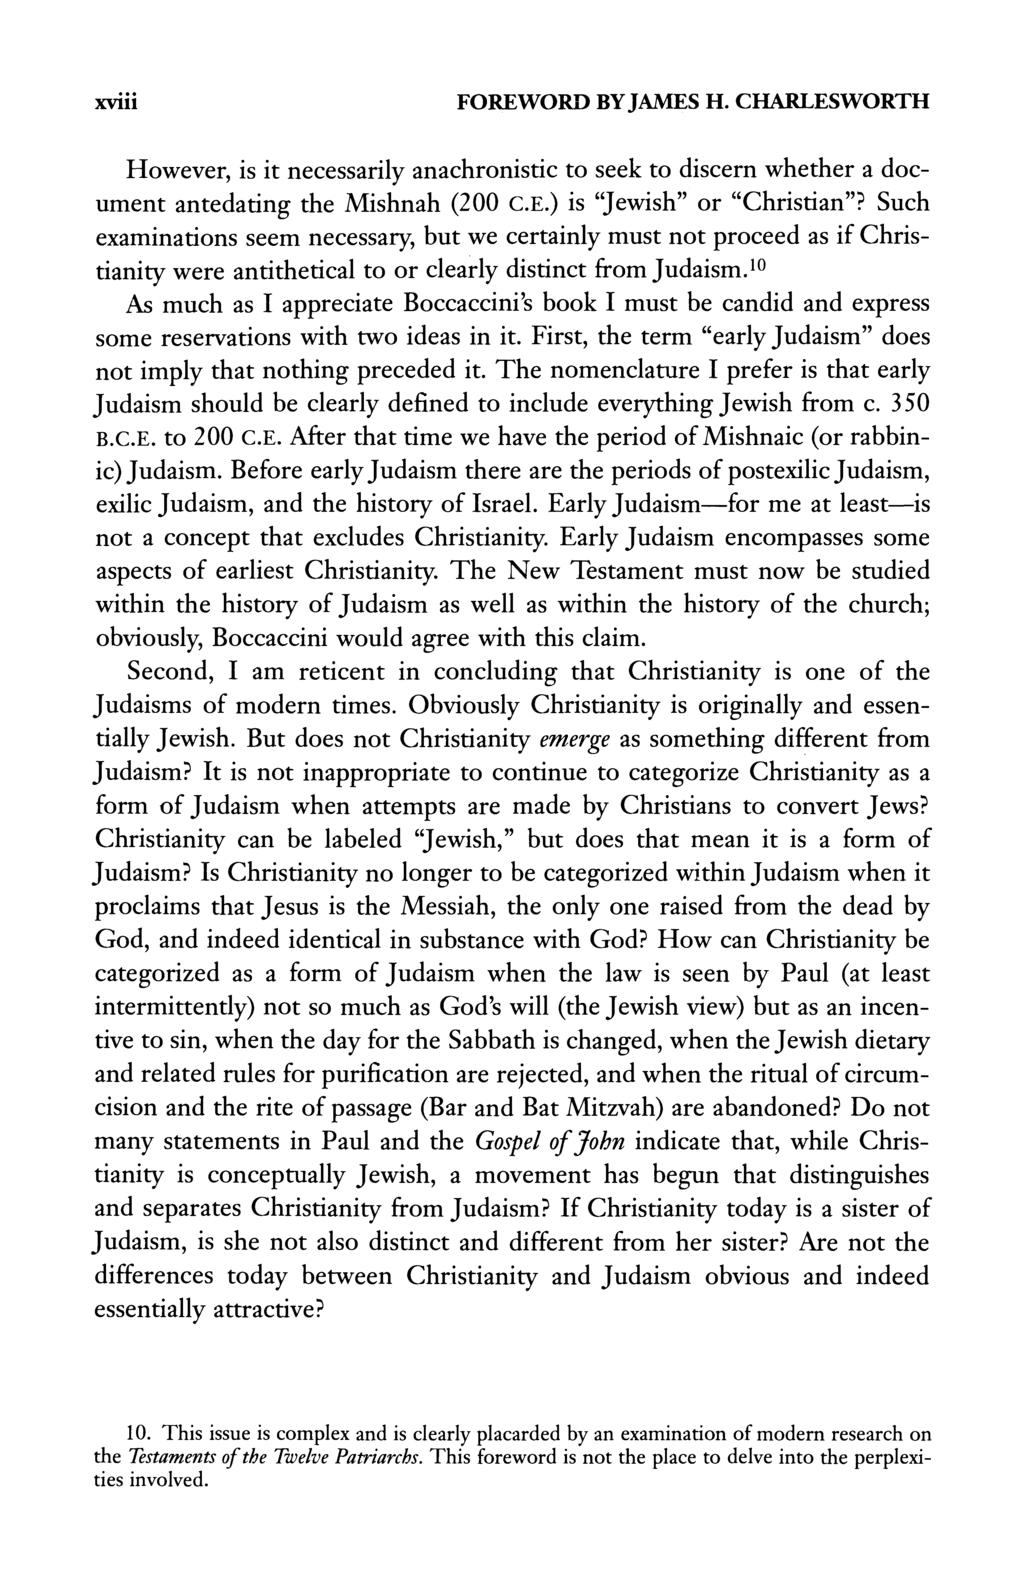 xviii FOREWORD BY JAMES H. CHARLESWORTH However, is it necessarily anachronistic to seek to discern whether a document antedating the Mishnah (200 C.E.) is "Jewish" or "Christian"?